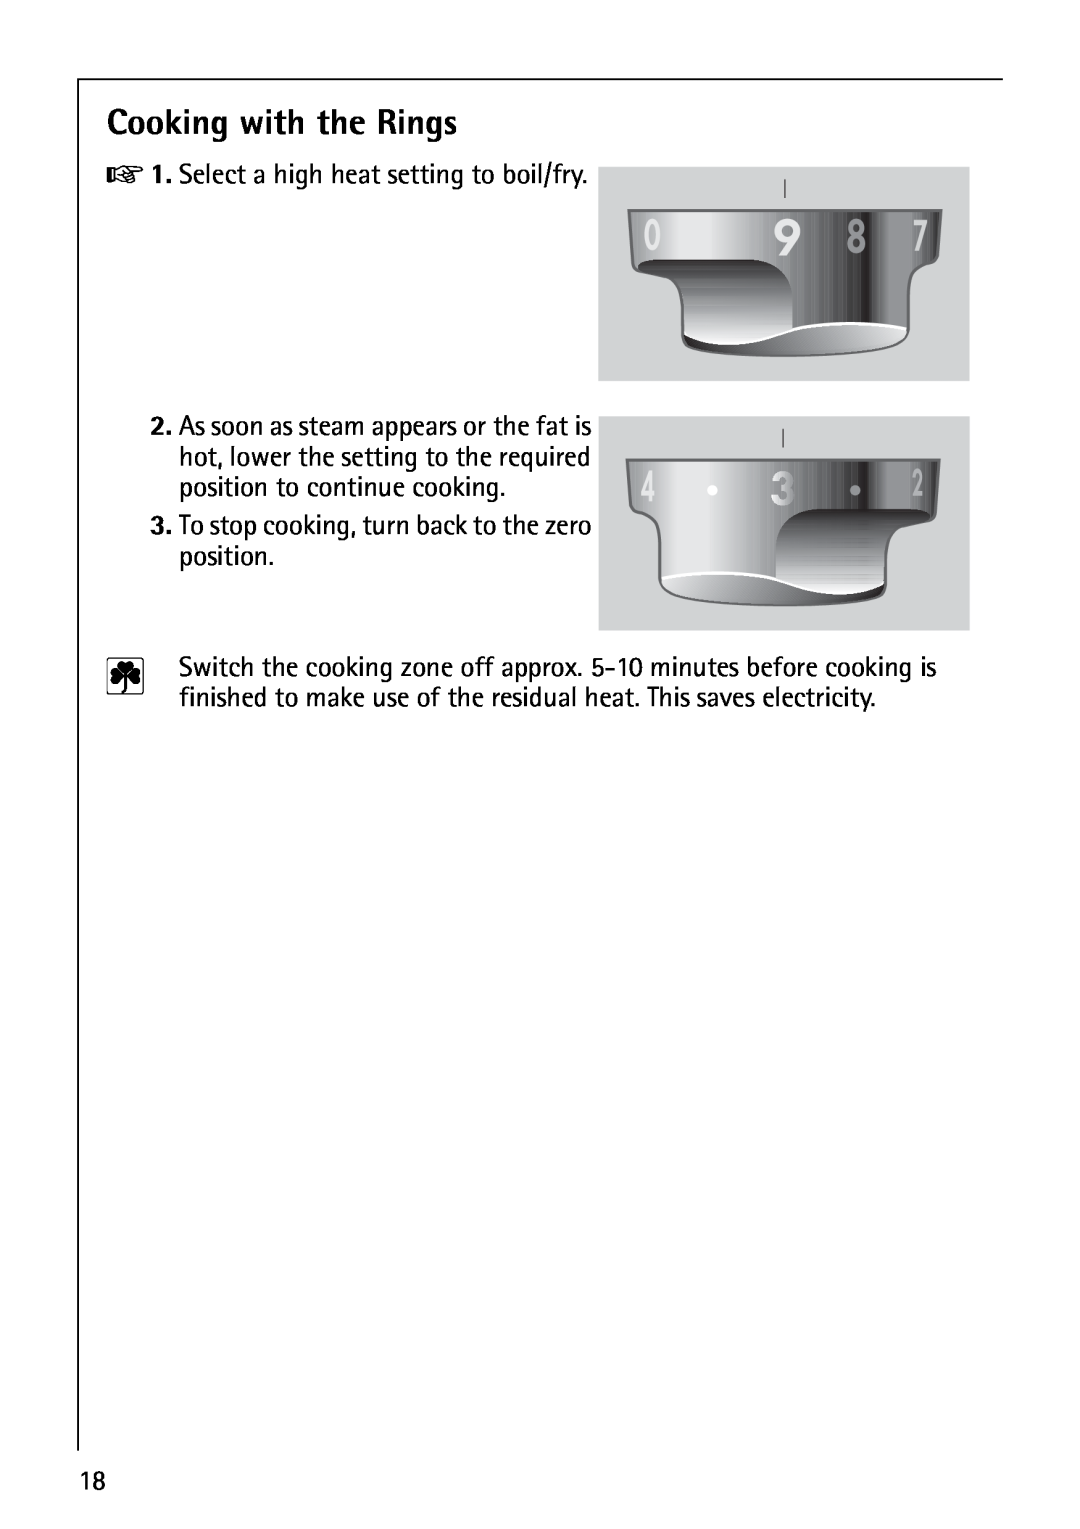 AEG E3100-1 Cooking with the Rings, 0 1. Select a high heat setting to boil/fry, As soon as steam appears or the fat is 